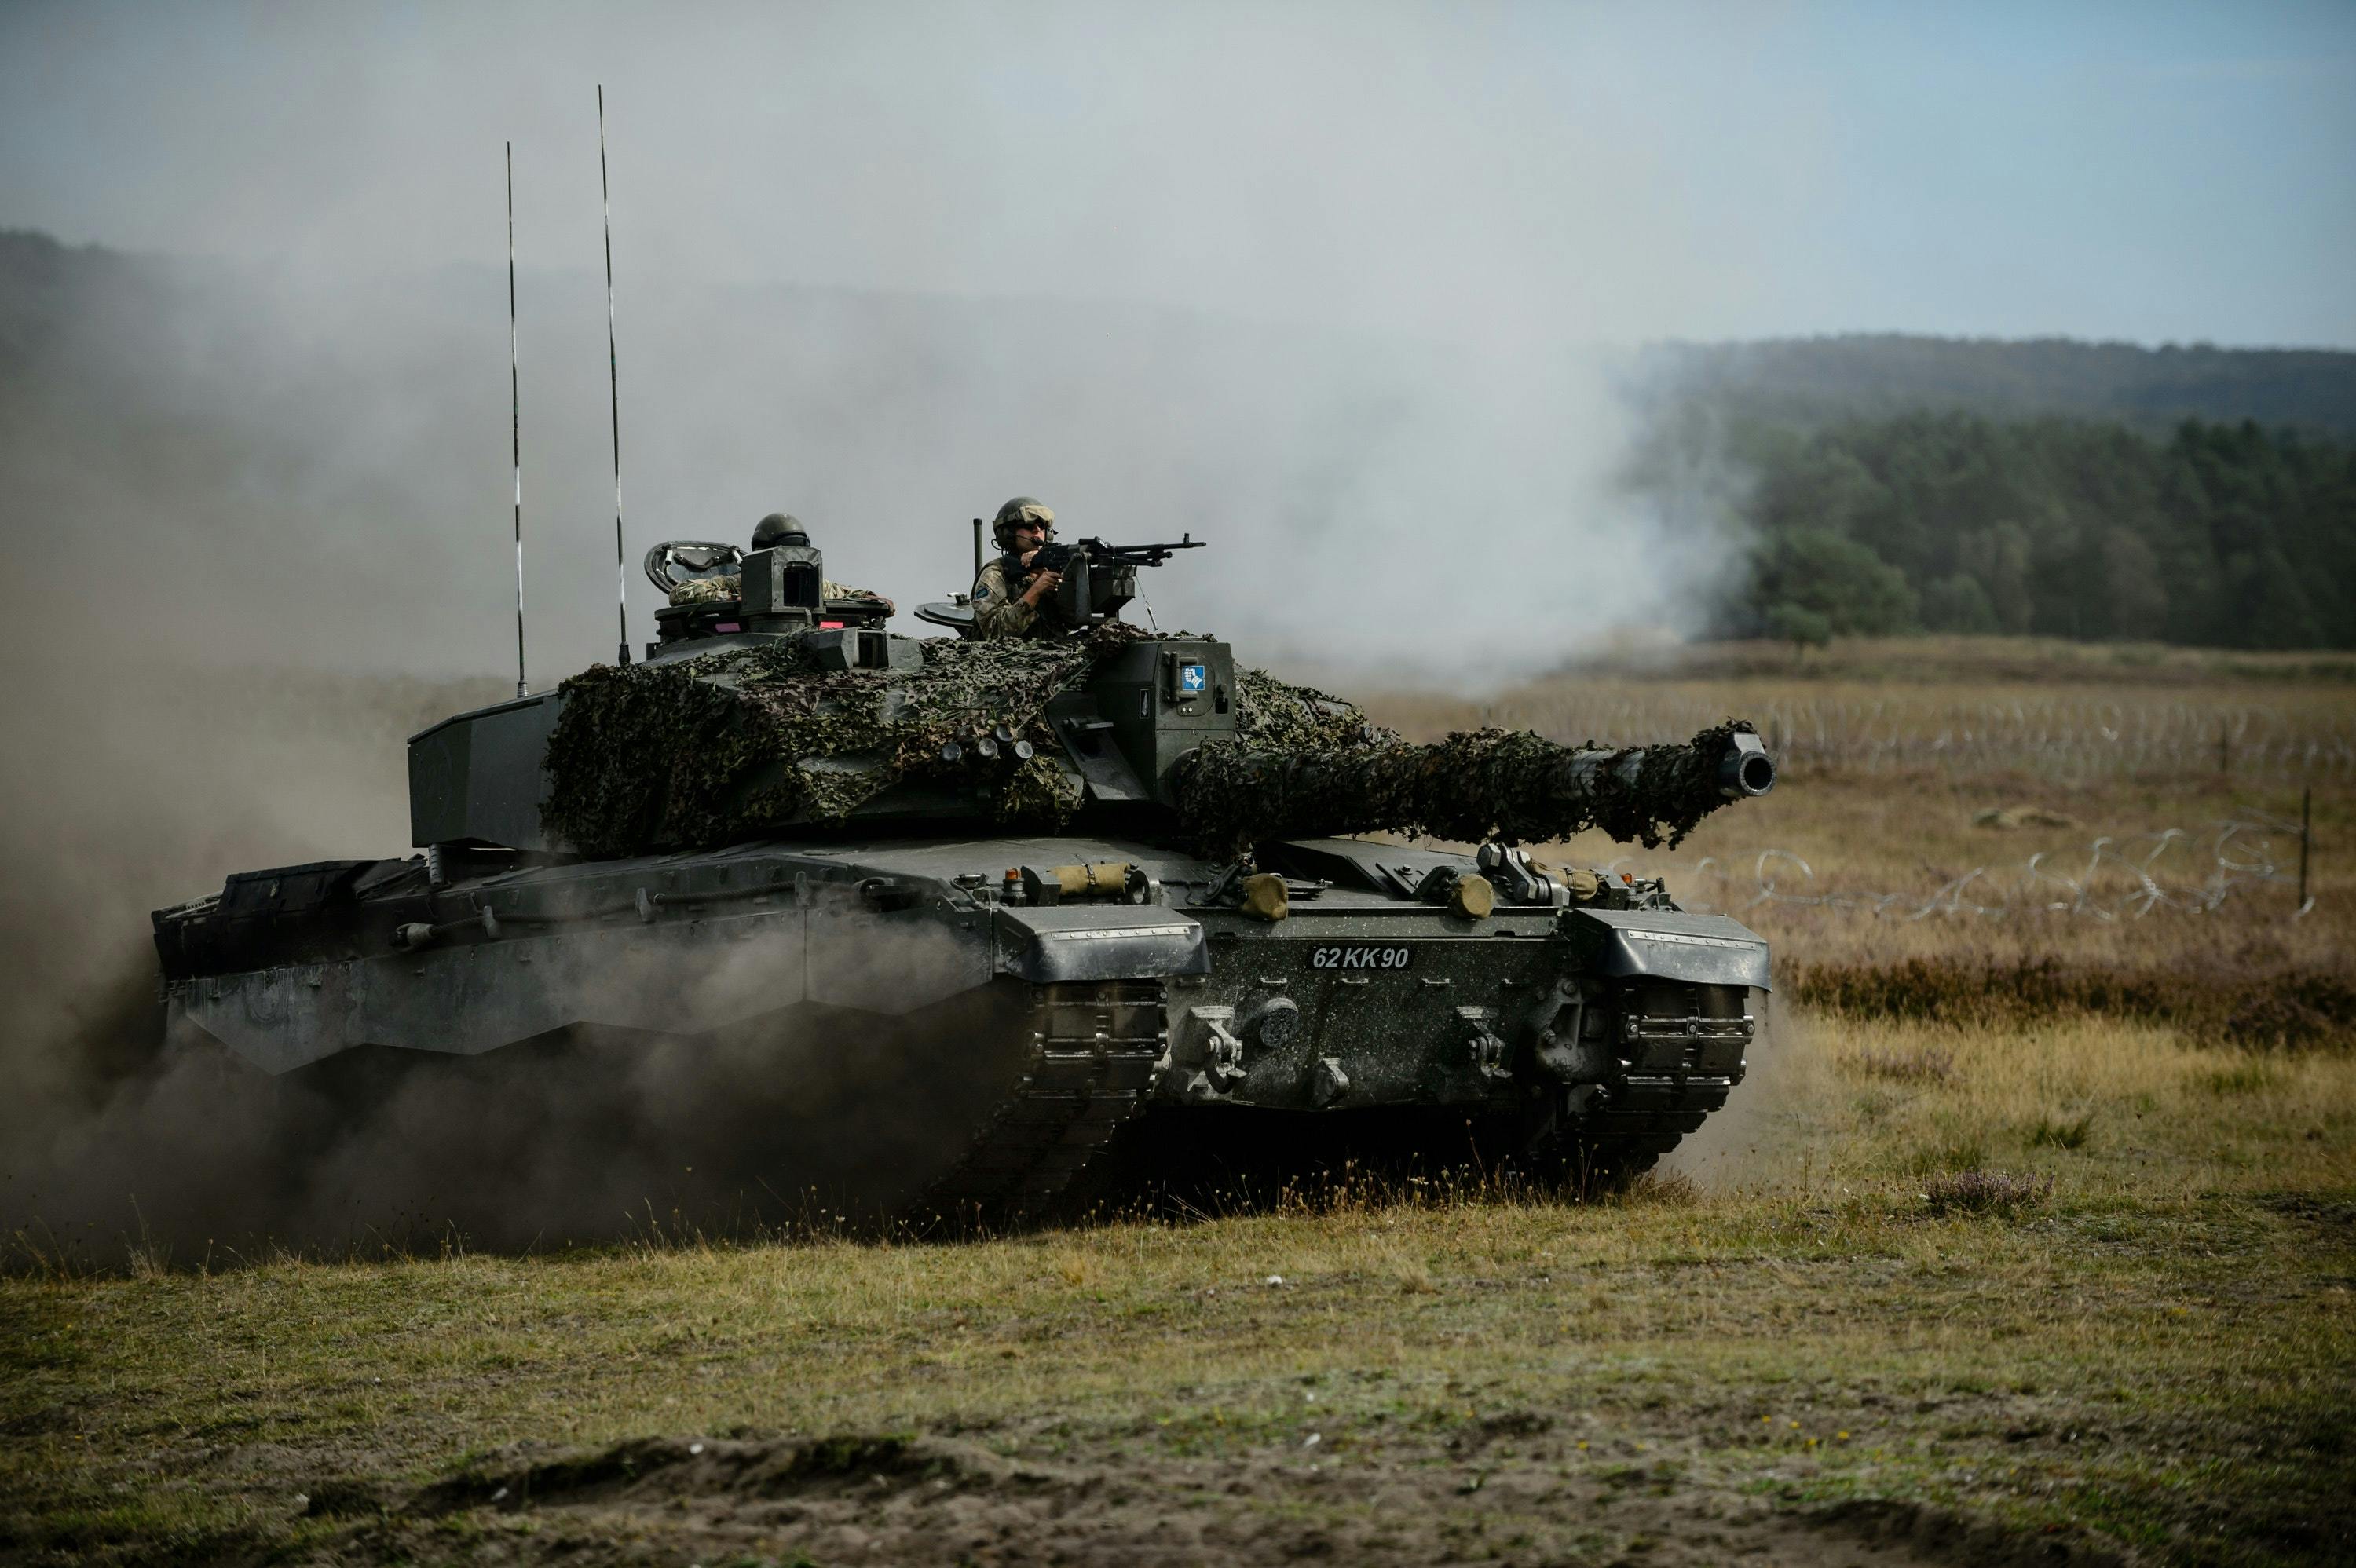 Challenger 2: Compared to the Competition